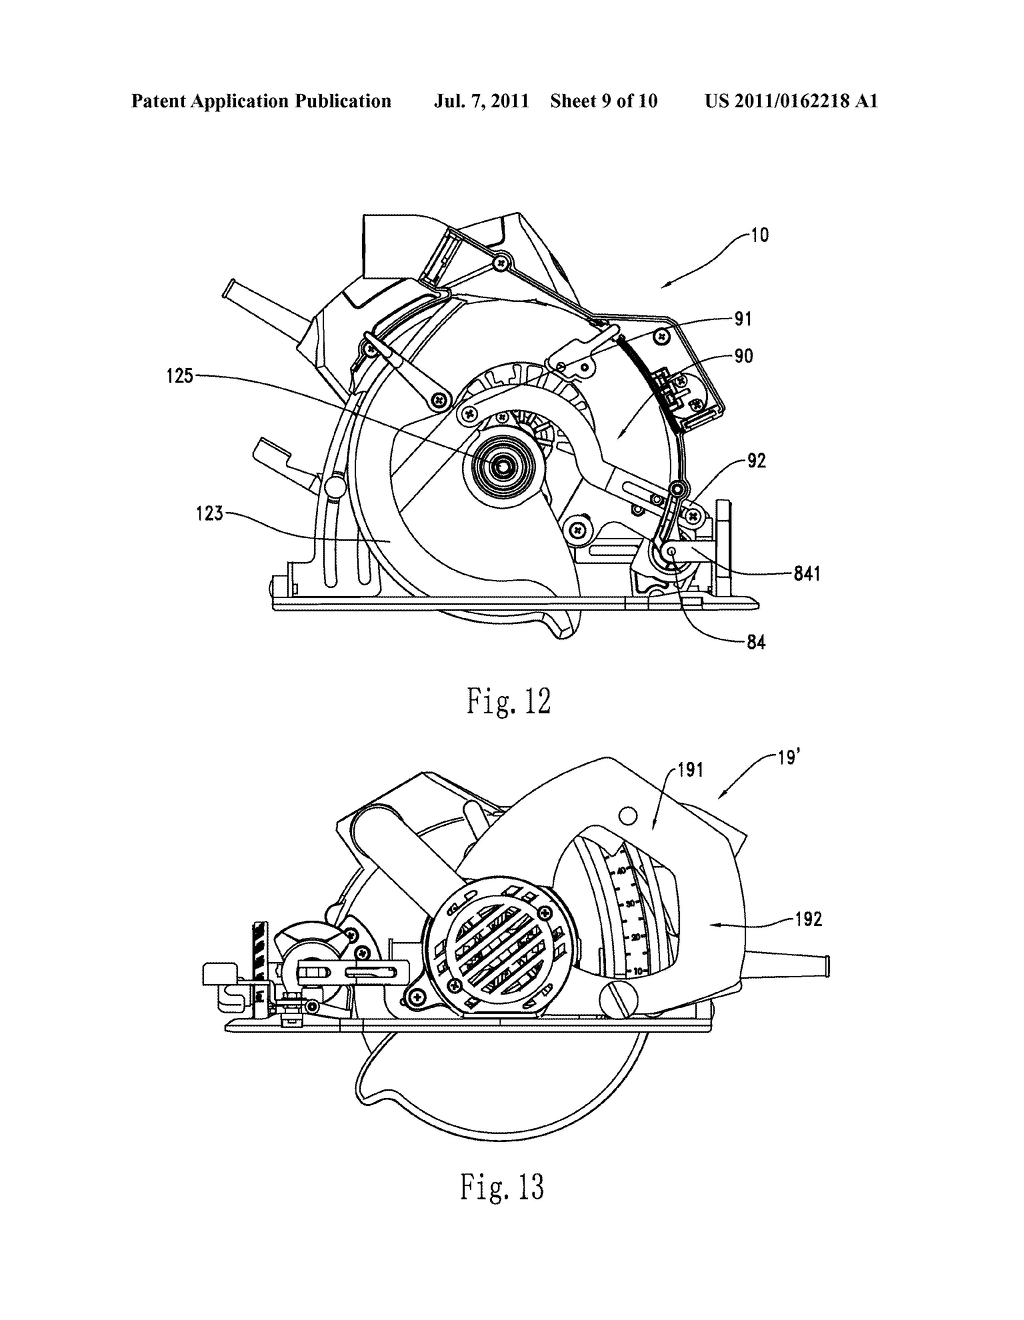 HAND HELD CIRCULAR SAW POWER TOOL HAVING MULTIPLE MODES OF OPERATION - diagram, schematic, and image 10